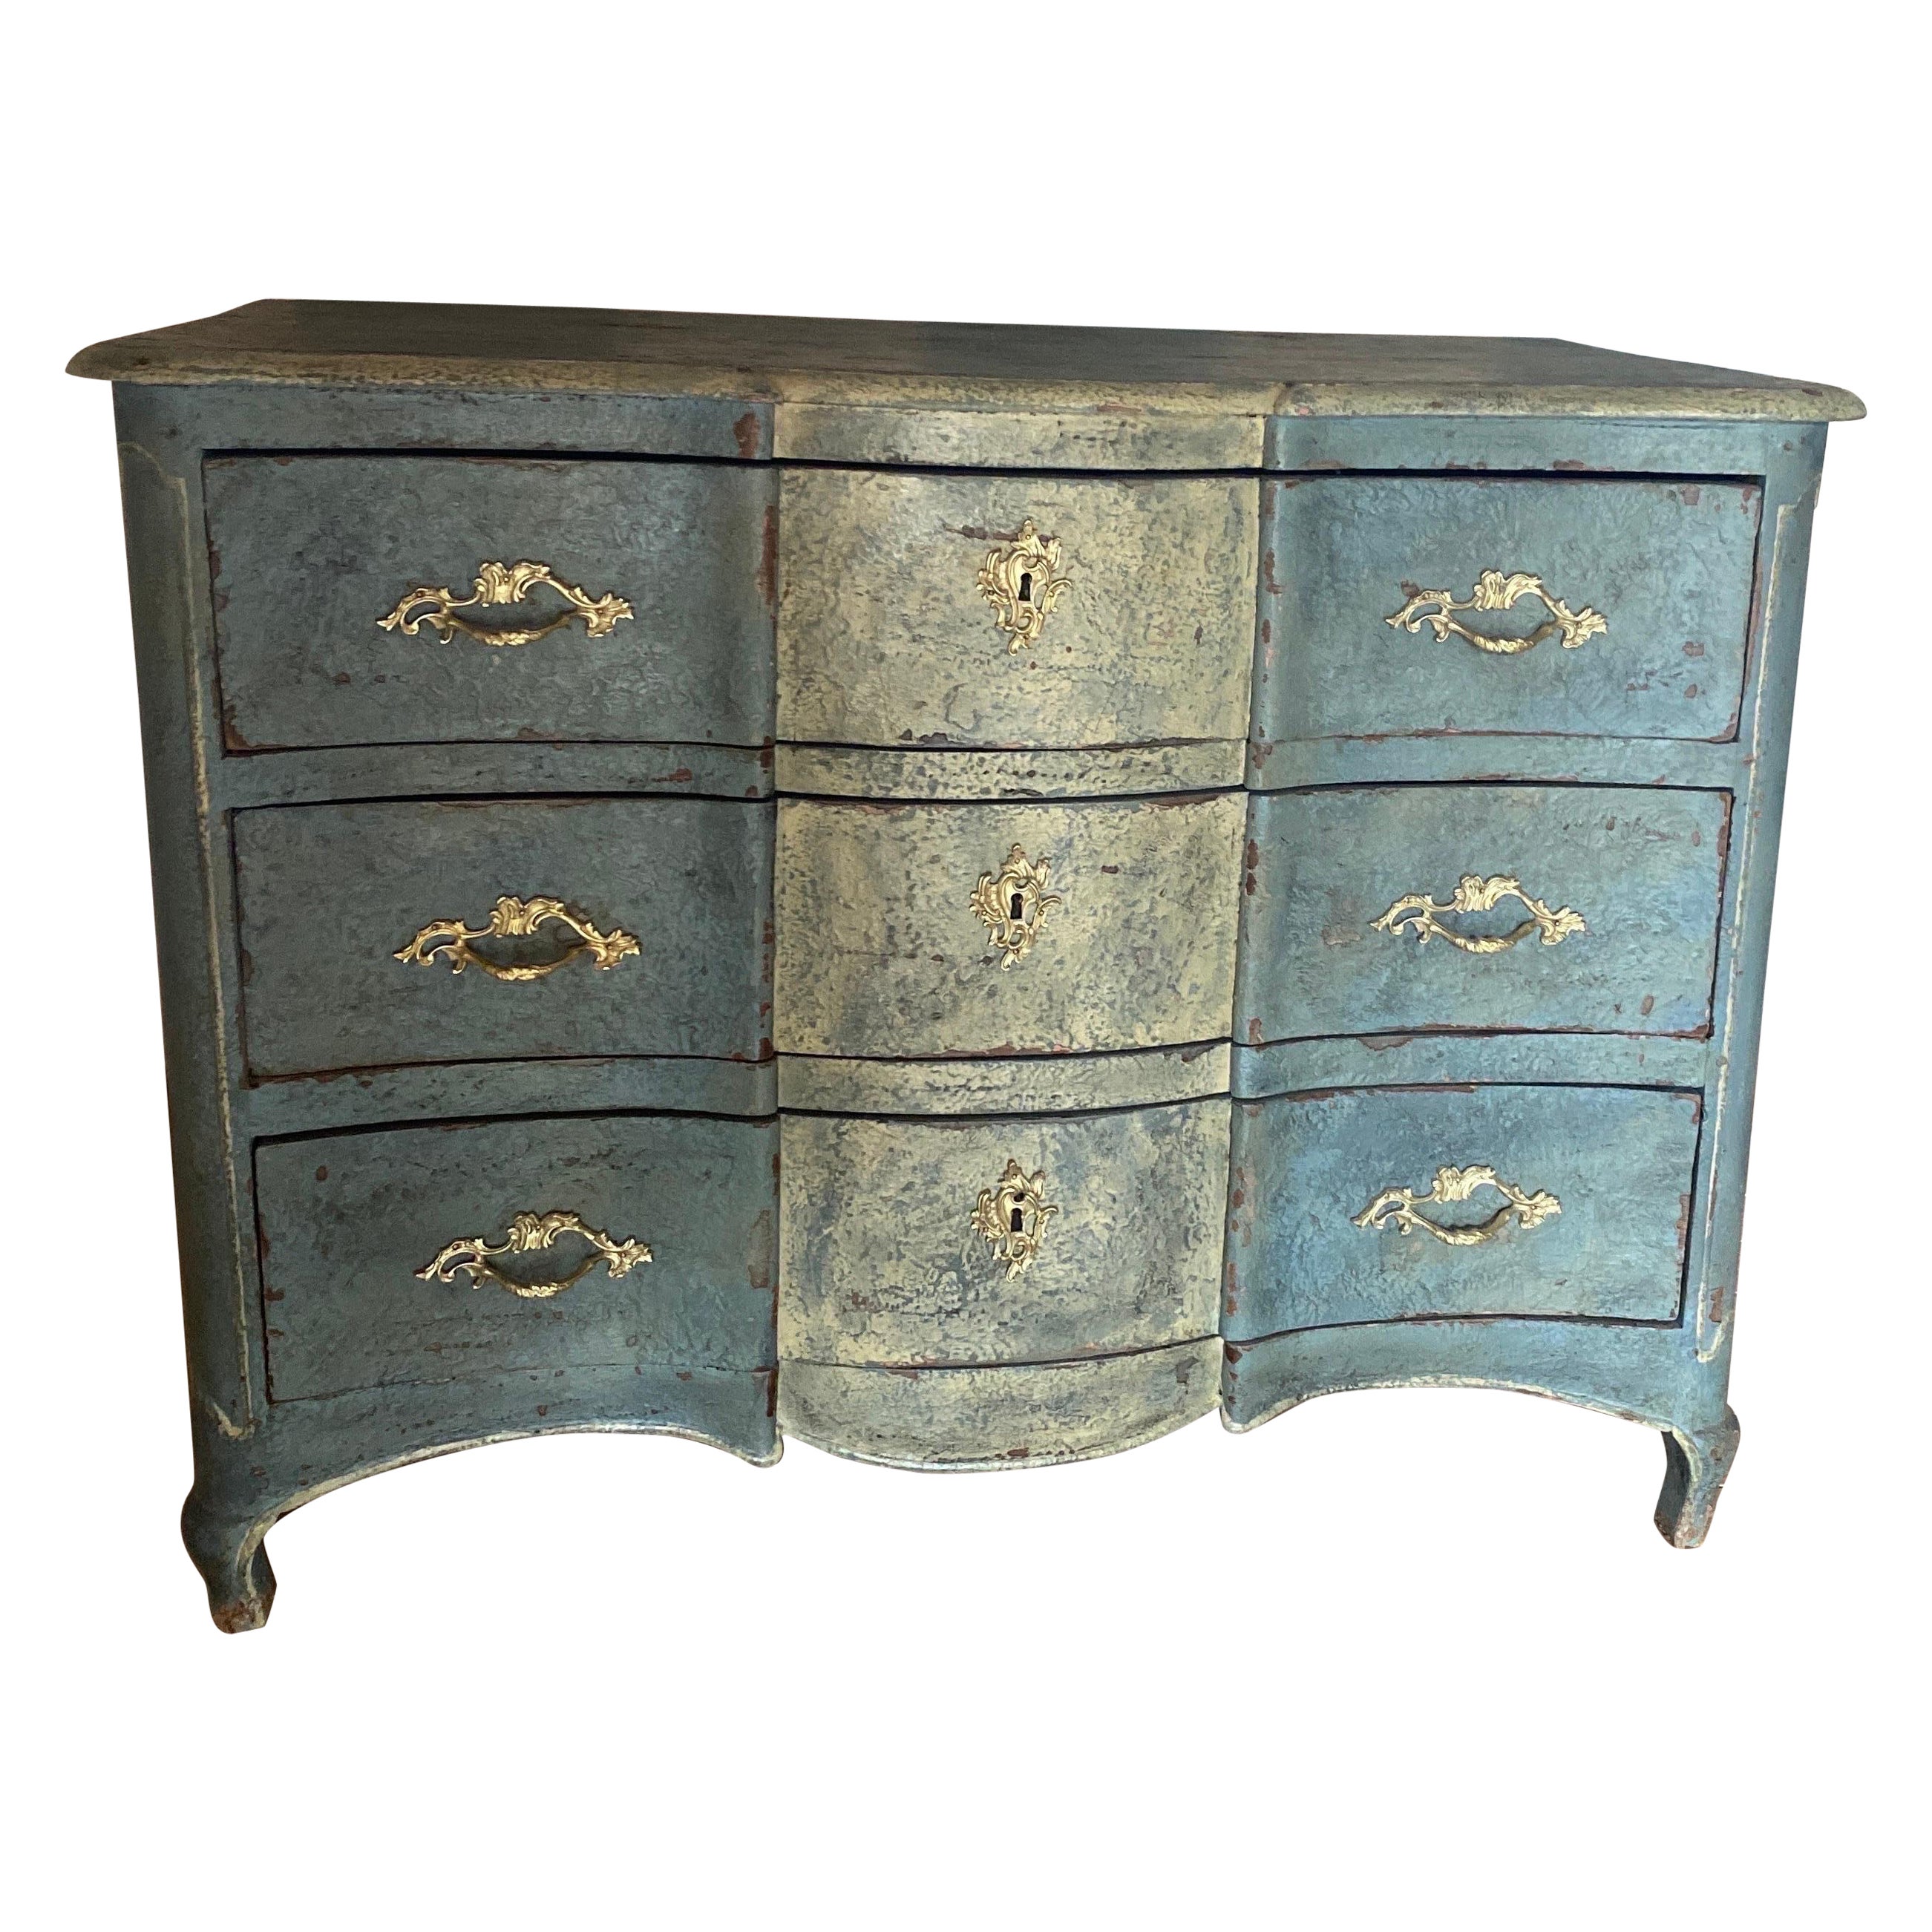 Louis XV galbée chest of drawers 2 Color patina 18th century 